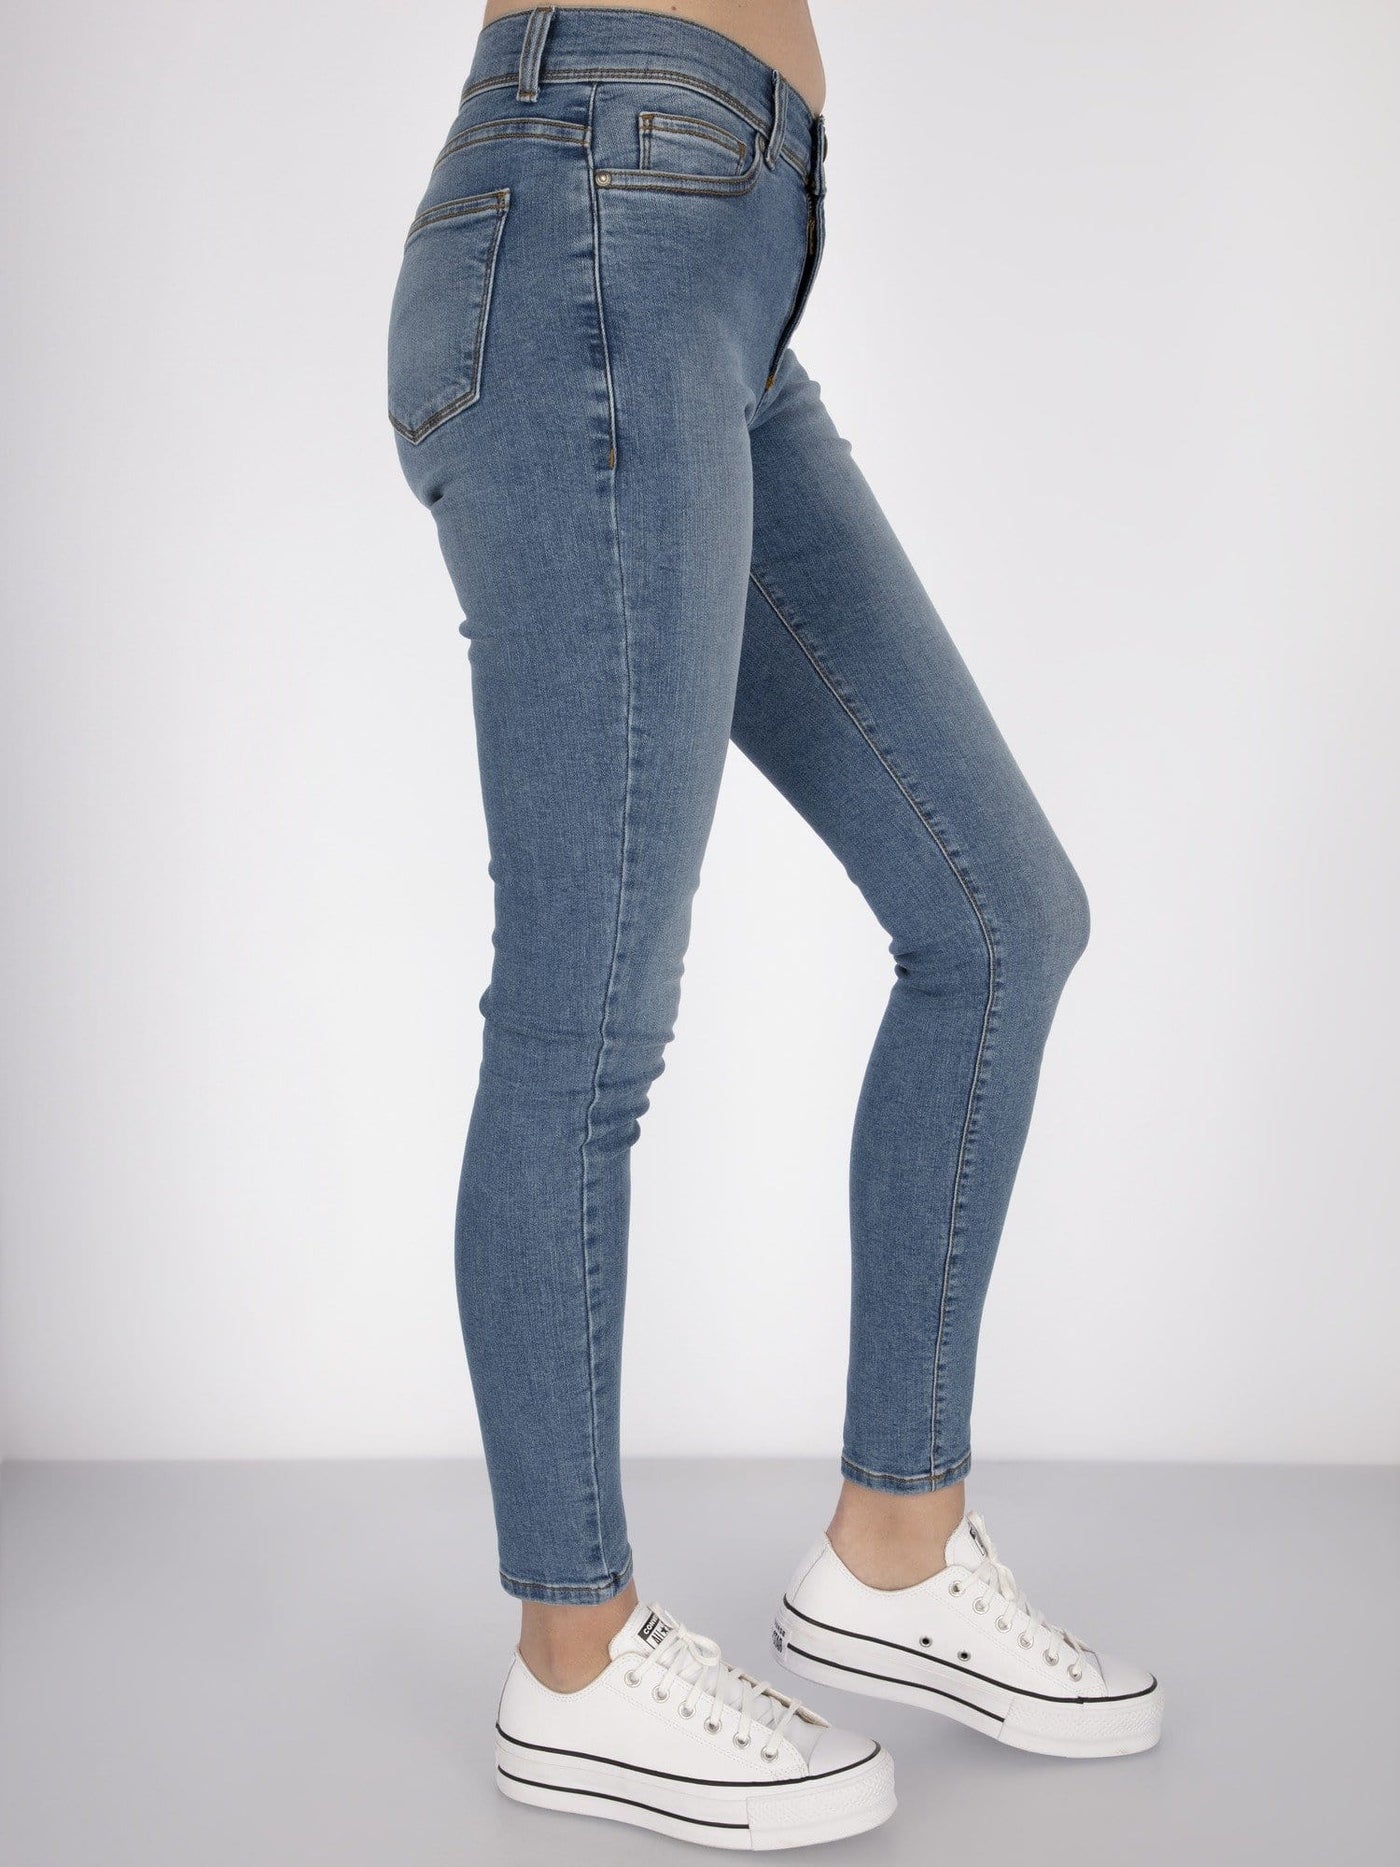 OR Jeans Basic Skinny Jeans Pants